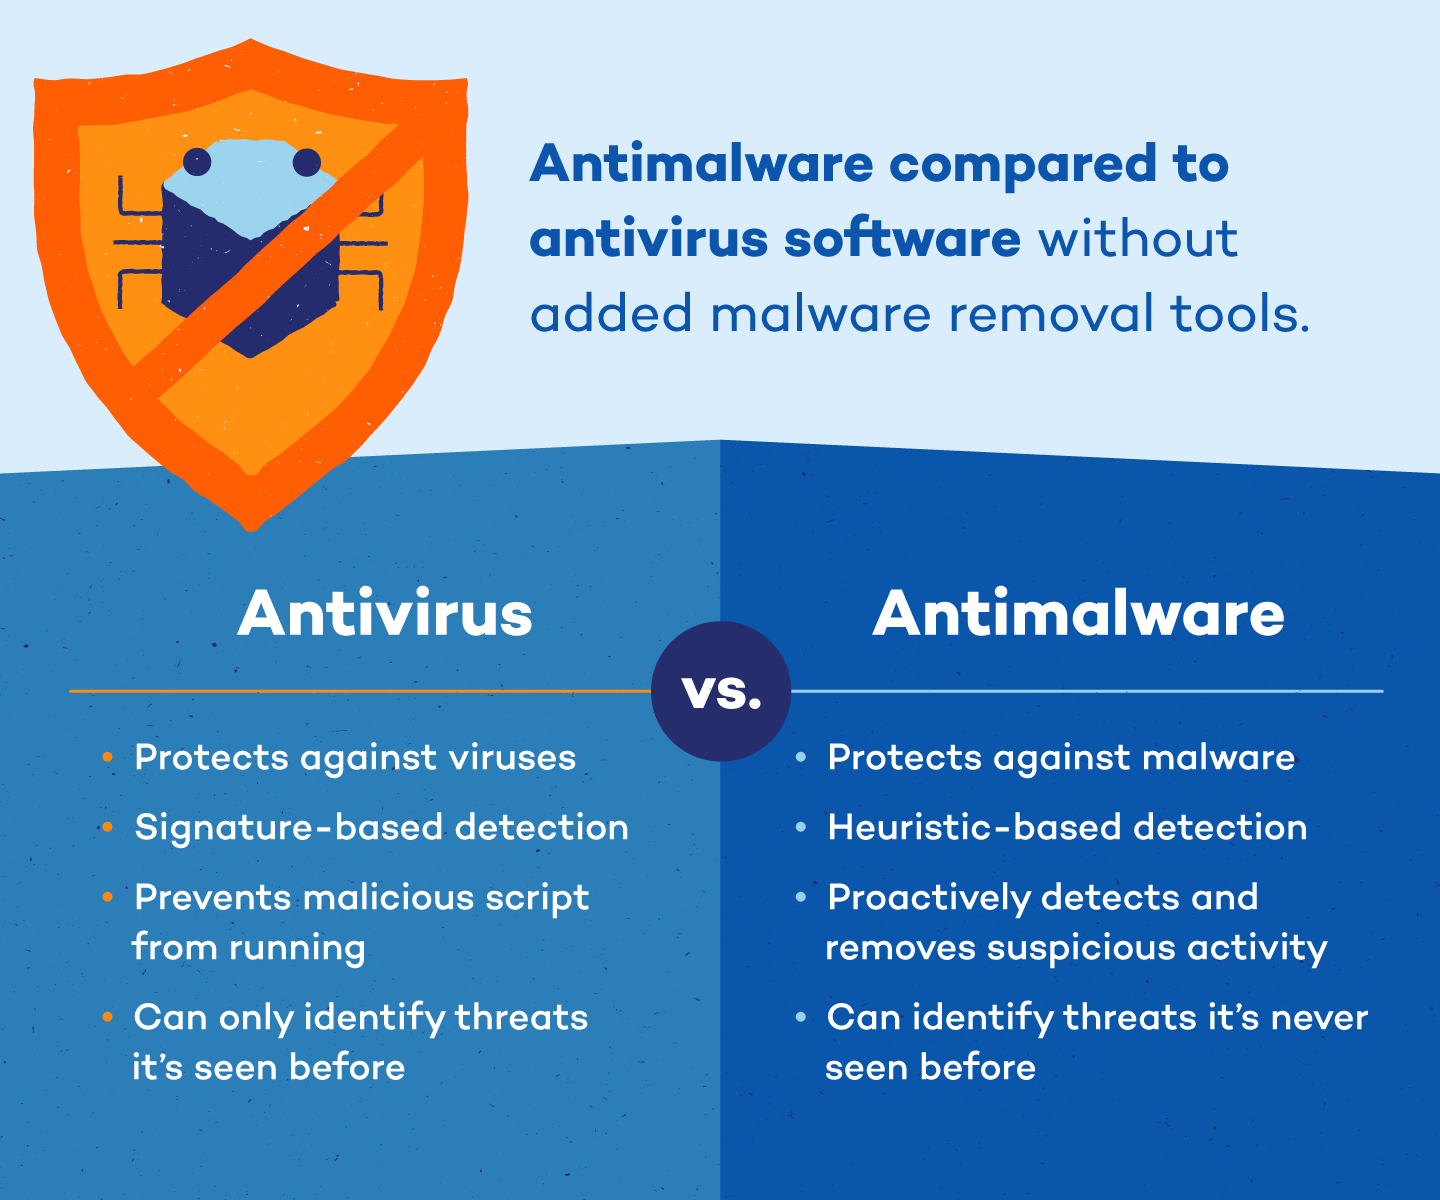 Use a reliable antivirus or anti-malware software to scan your computer for any potential malware or viruses.
If any threats are detected, follow the software's instructions to remove or quarantine the malicious files.